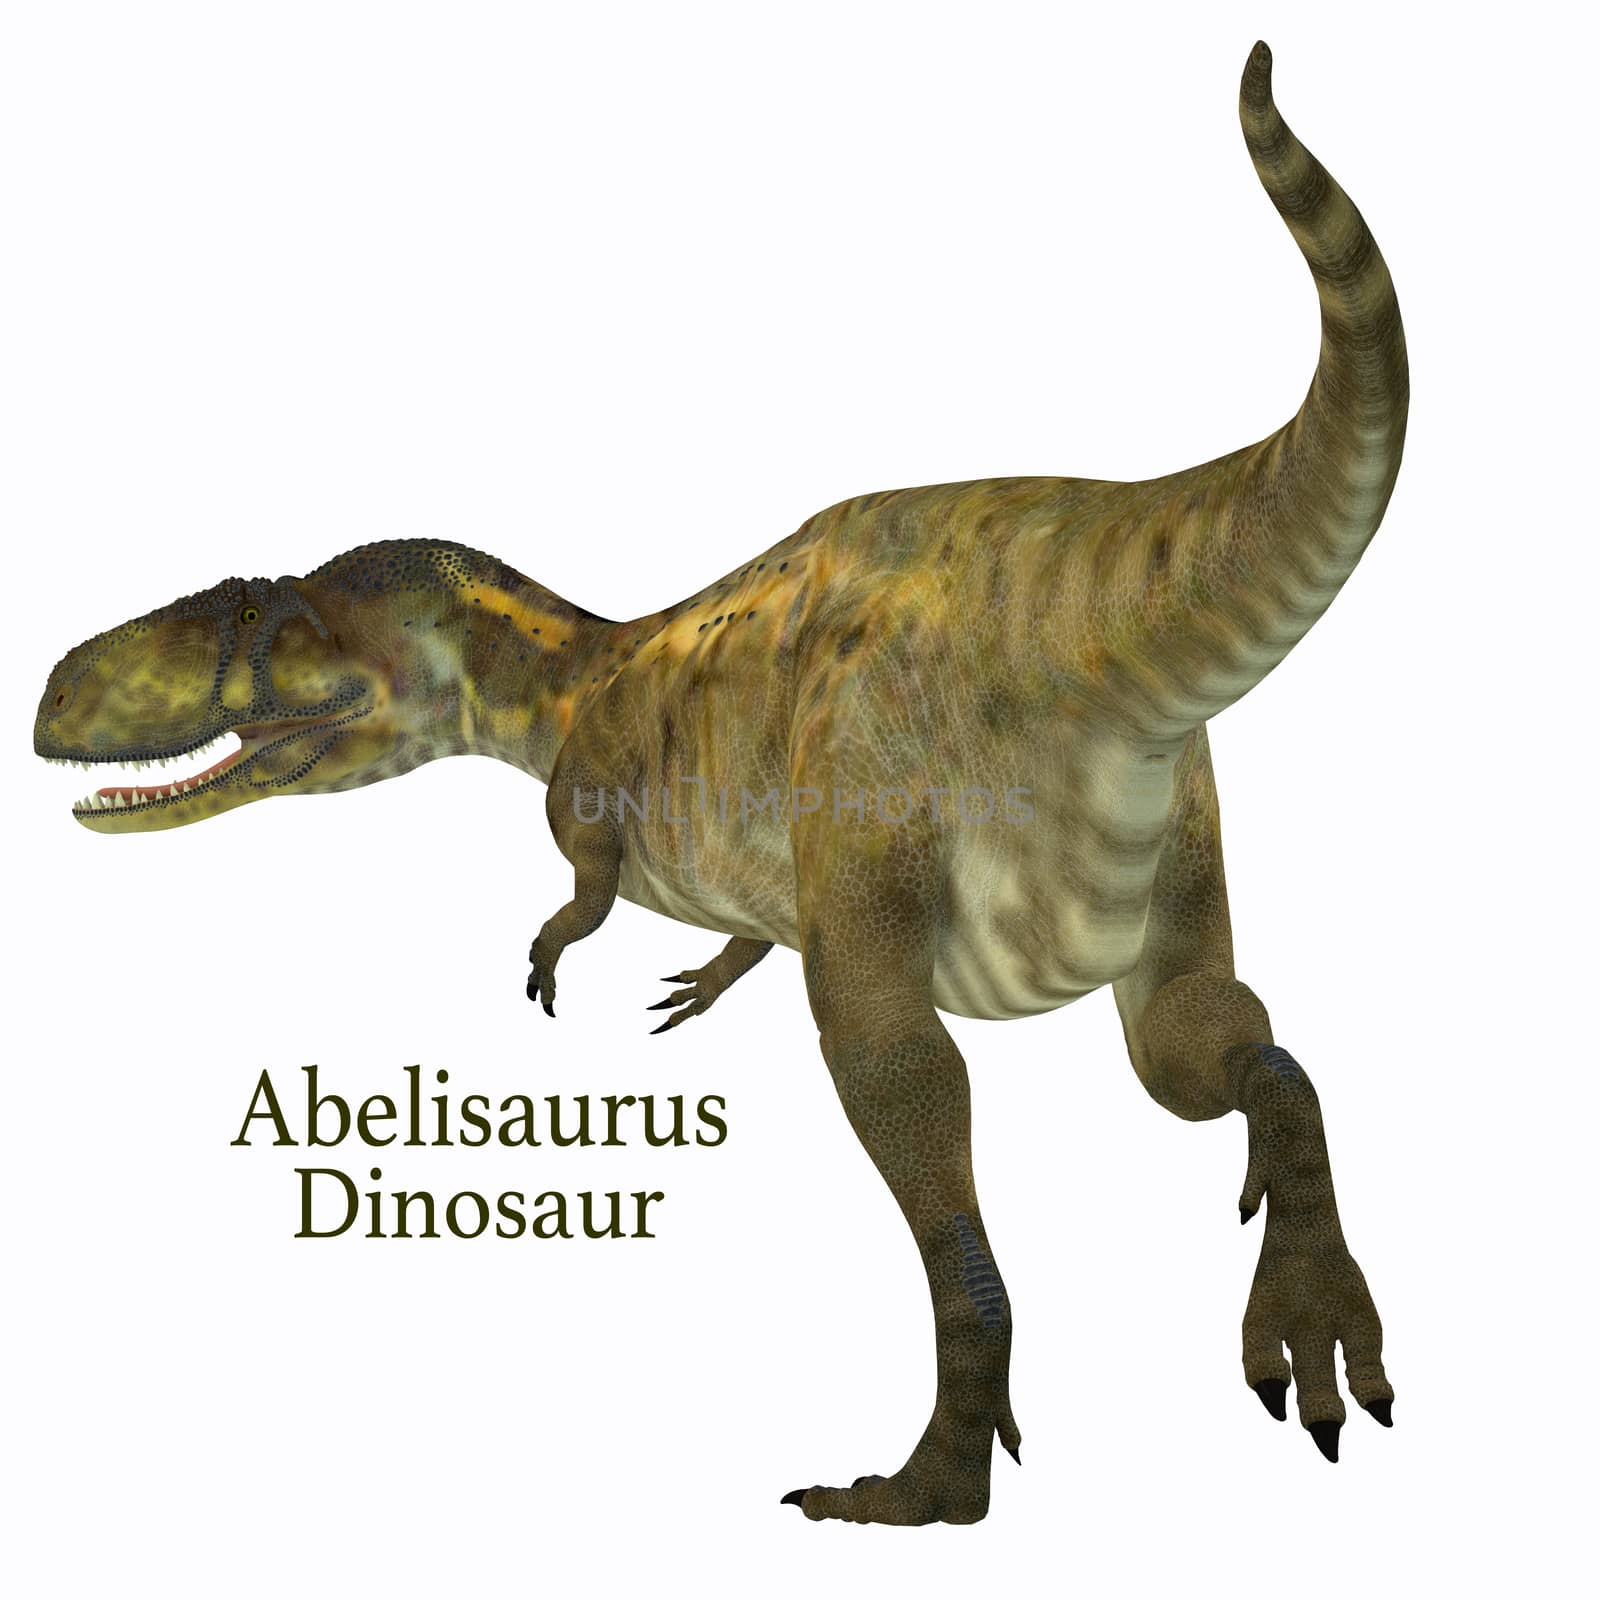 Abelisaurus Dinosaur Tail with Font by Catmando